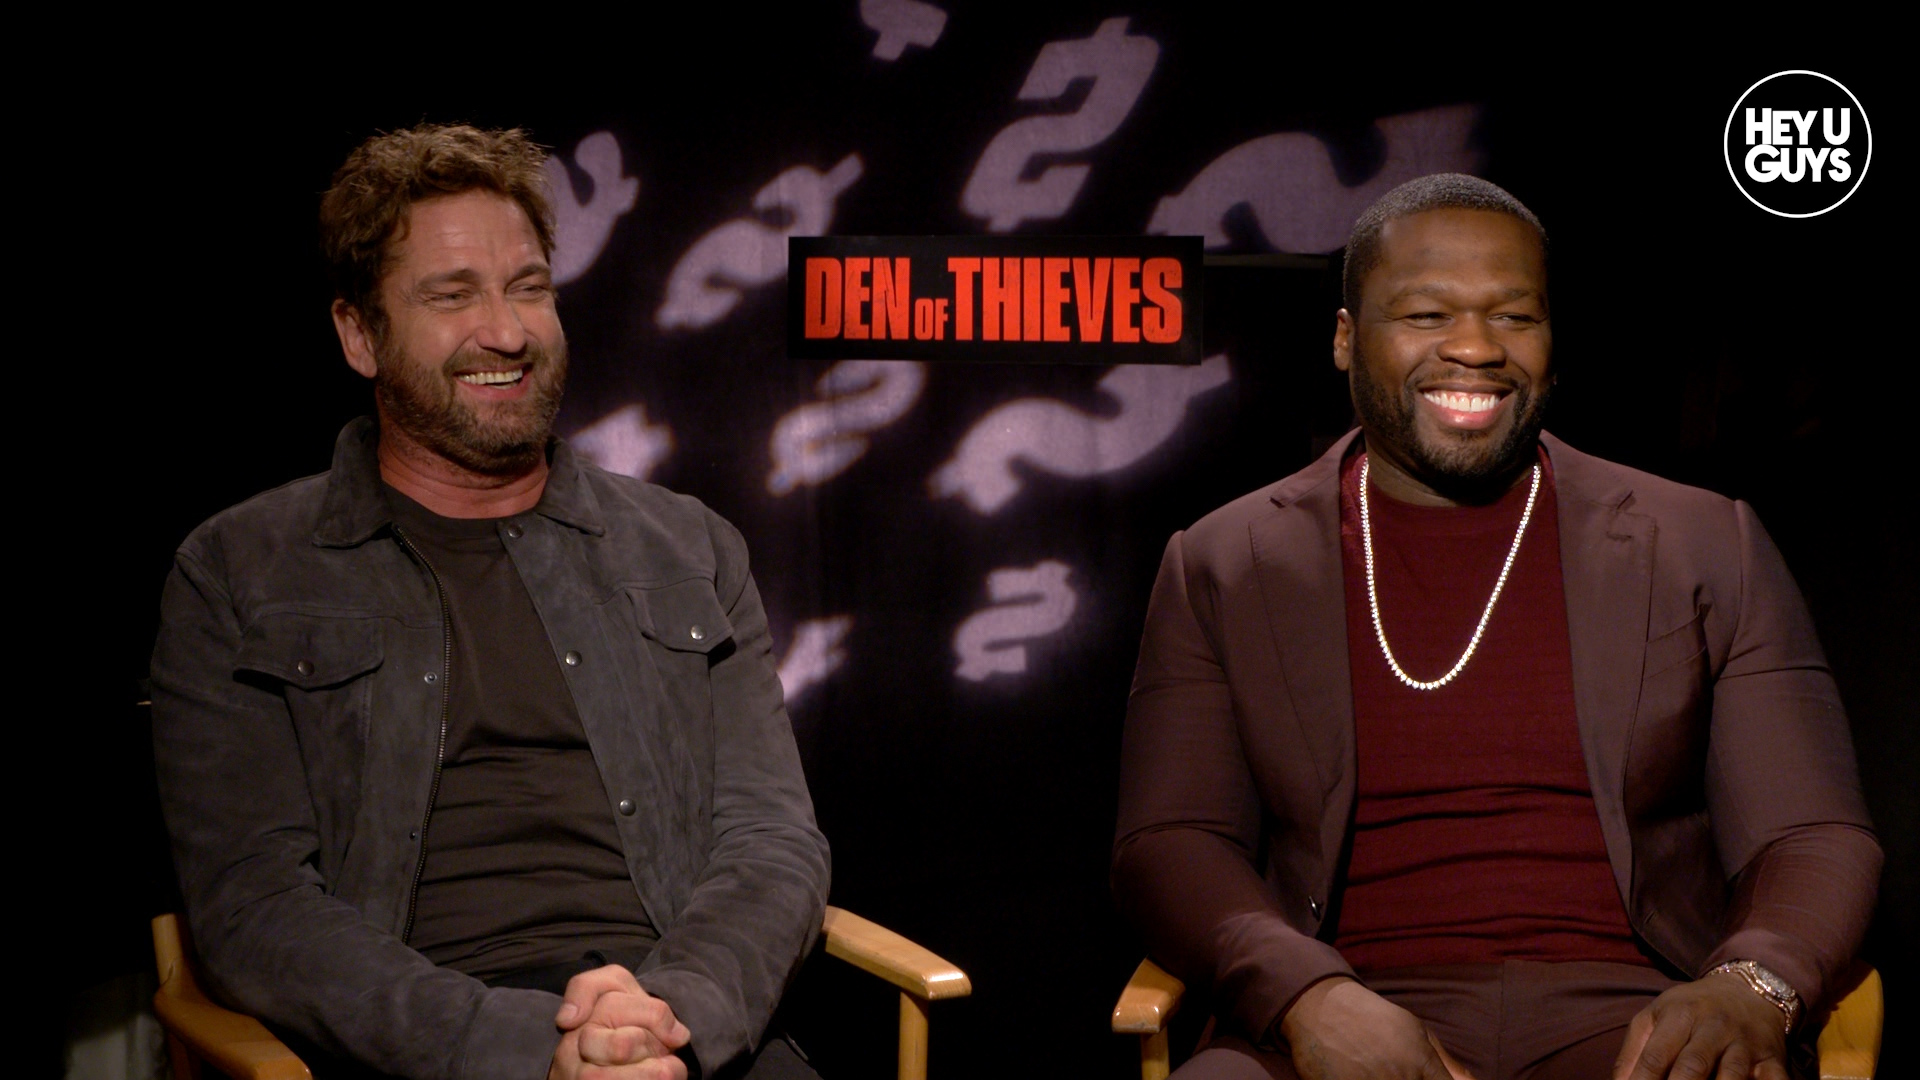 Gerard Butler & Fifty Cent - Den of Thieves Exclusive Interview